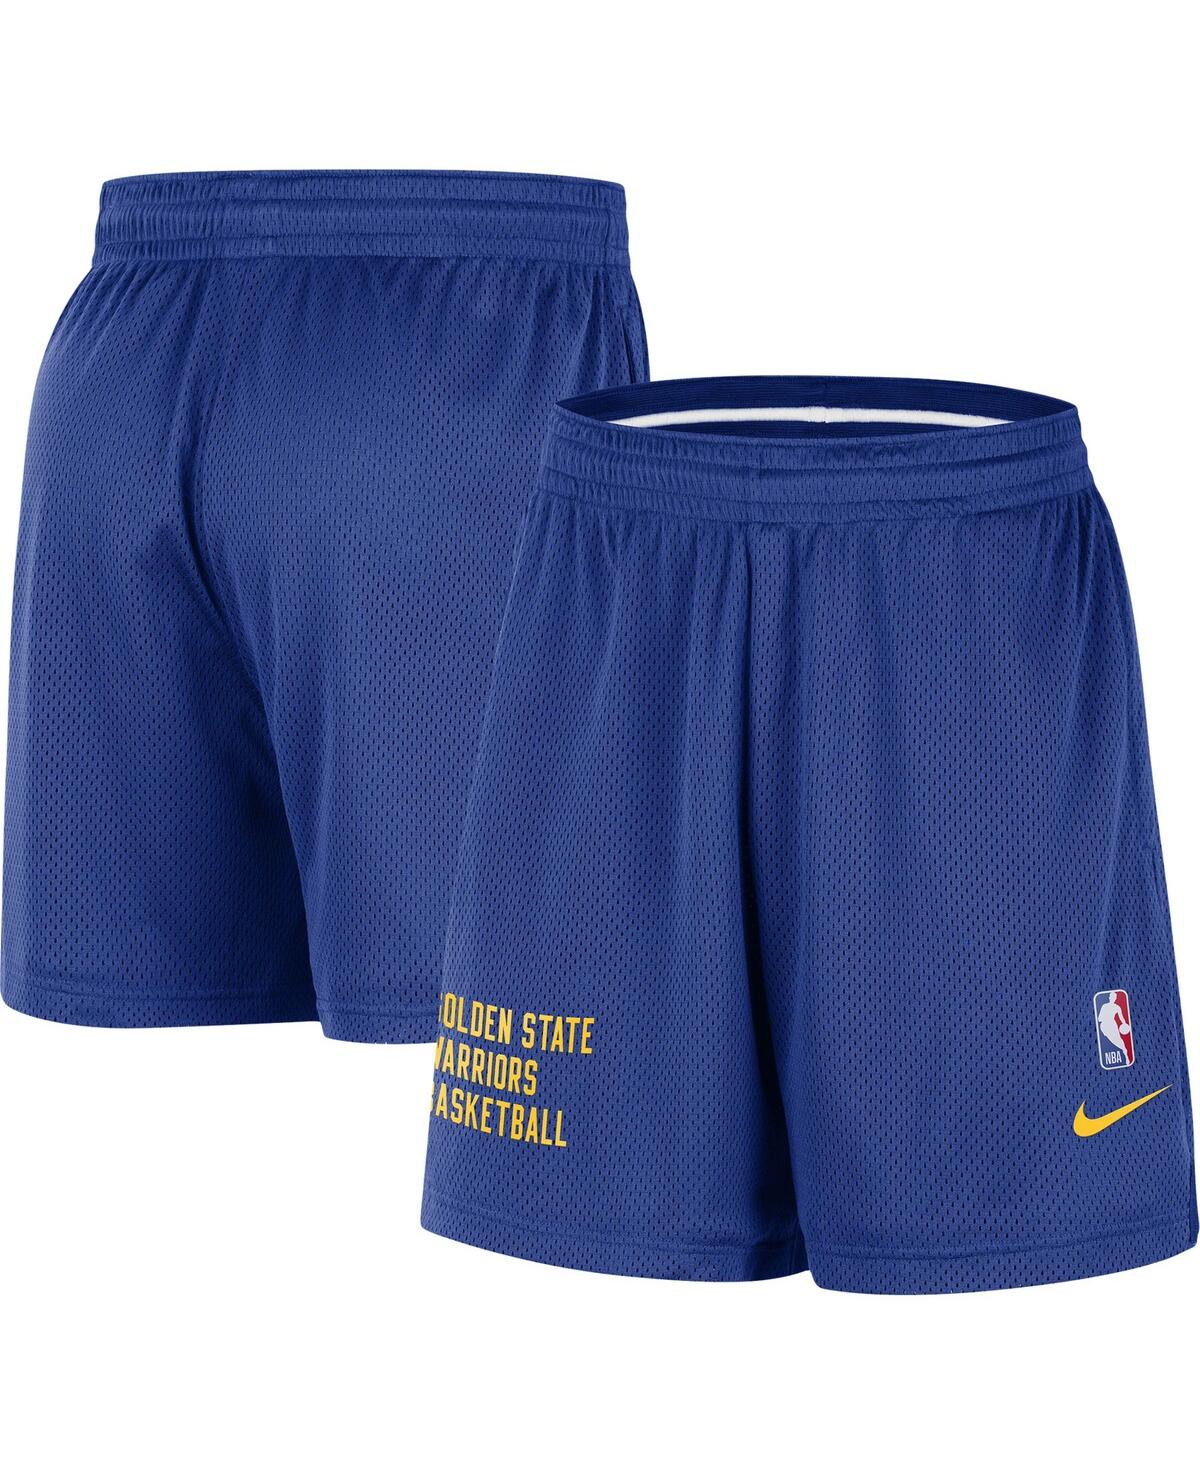 Men's and Women's Nike Royal Golden State Warriors Warm Up Performance Practice Shorts - Royal